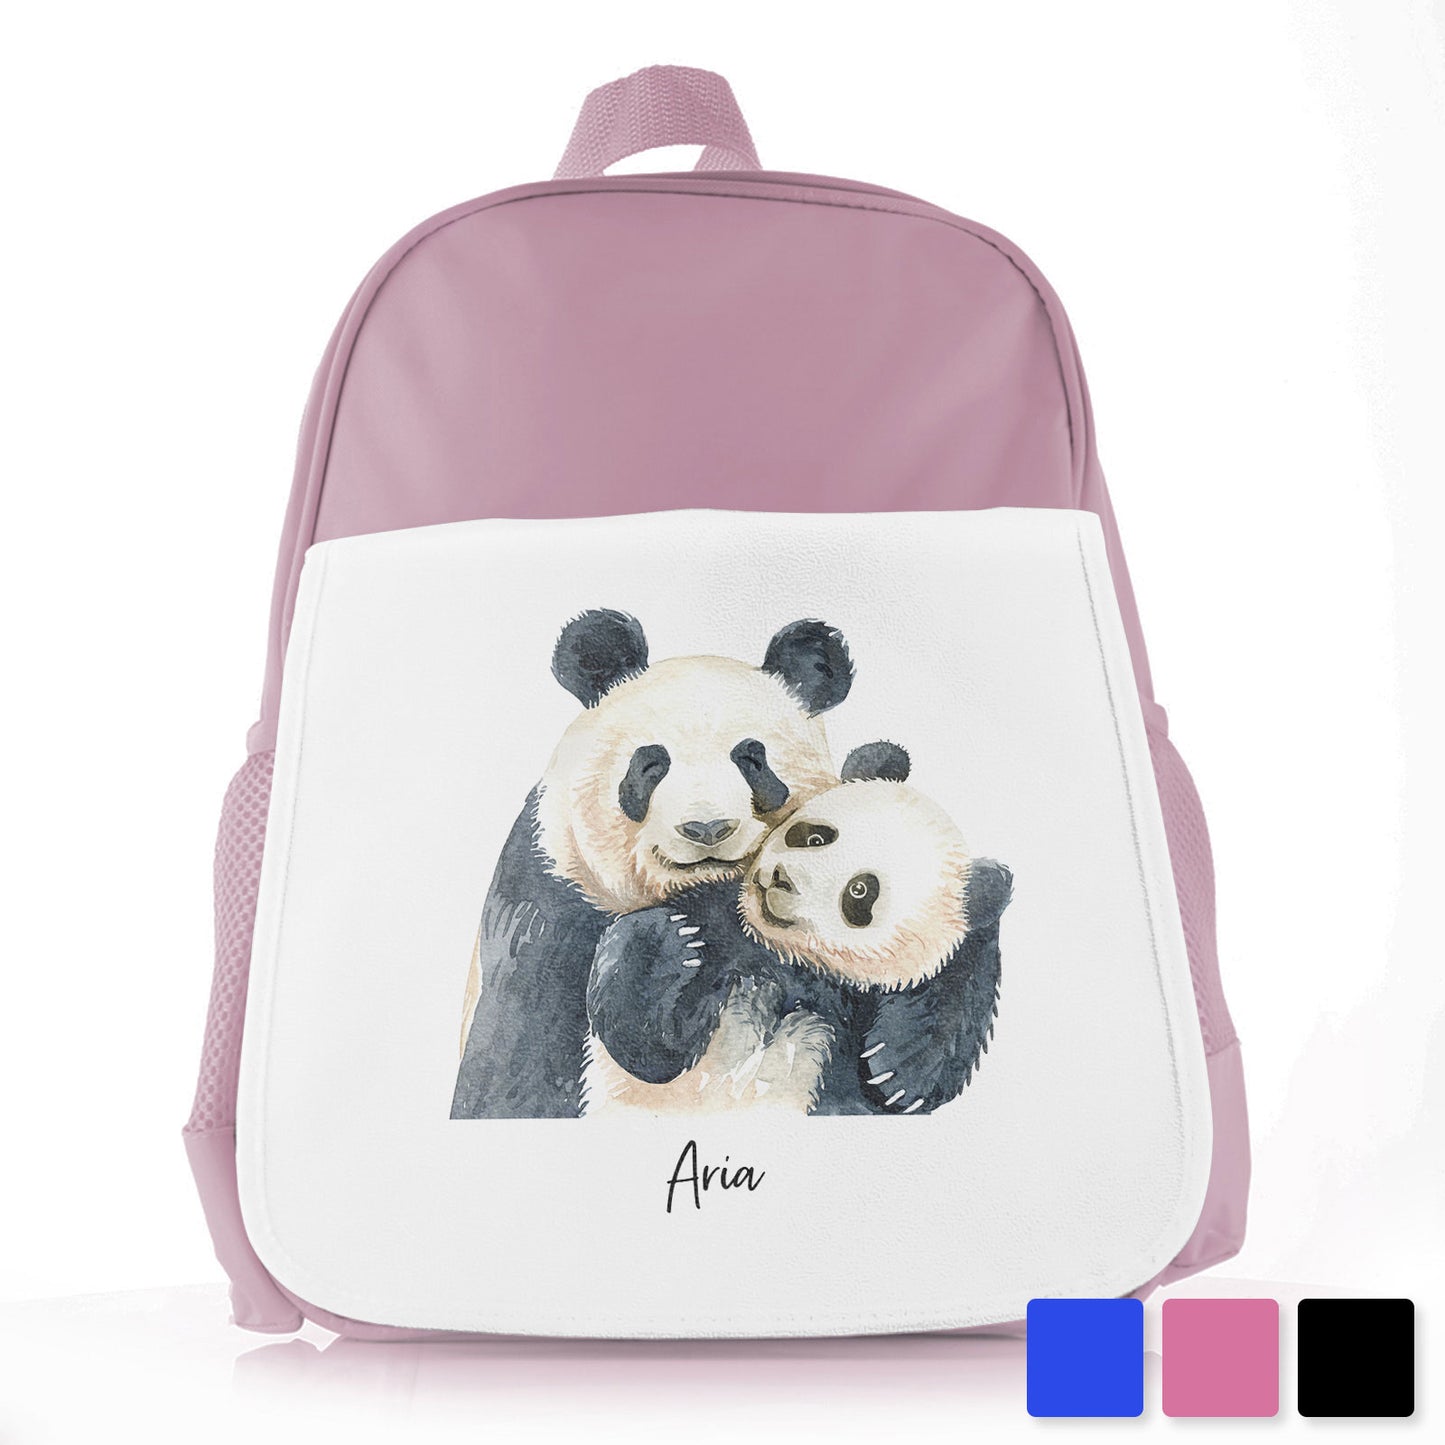 Personalised School Bag/Rucksack with Welcoming Text and Embracing Mum and Baby Pandas